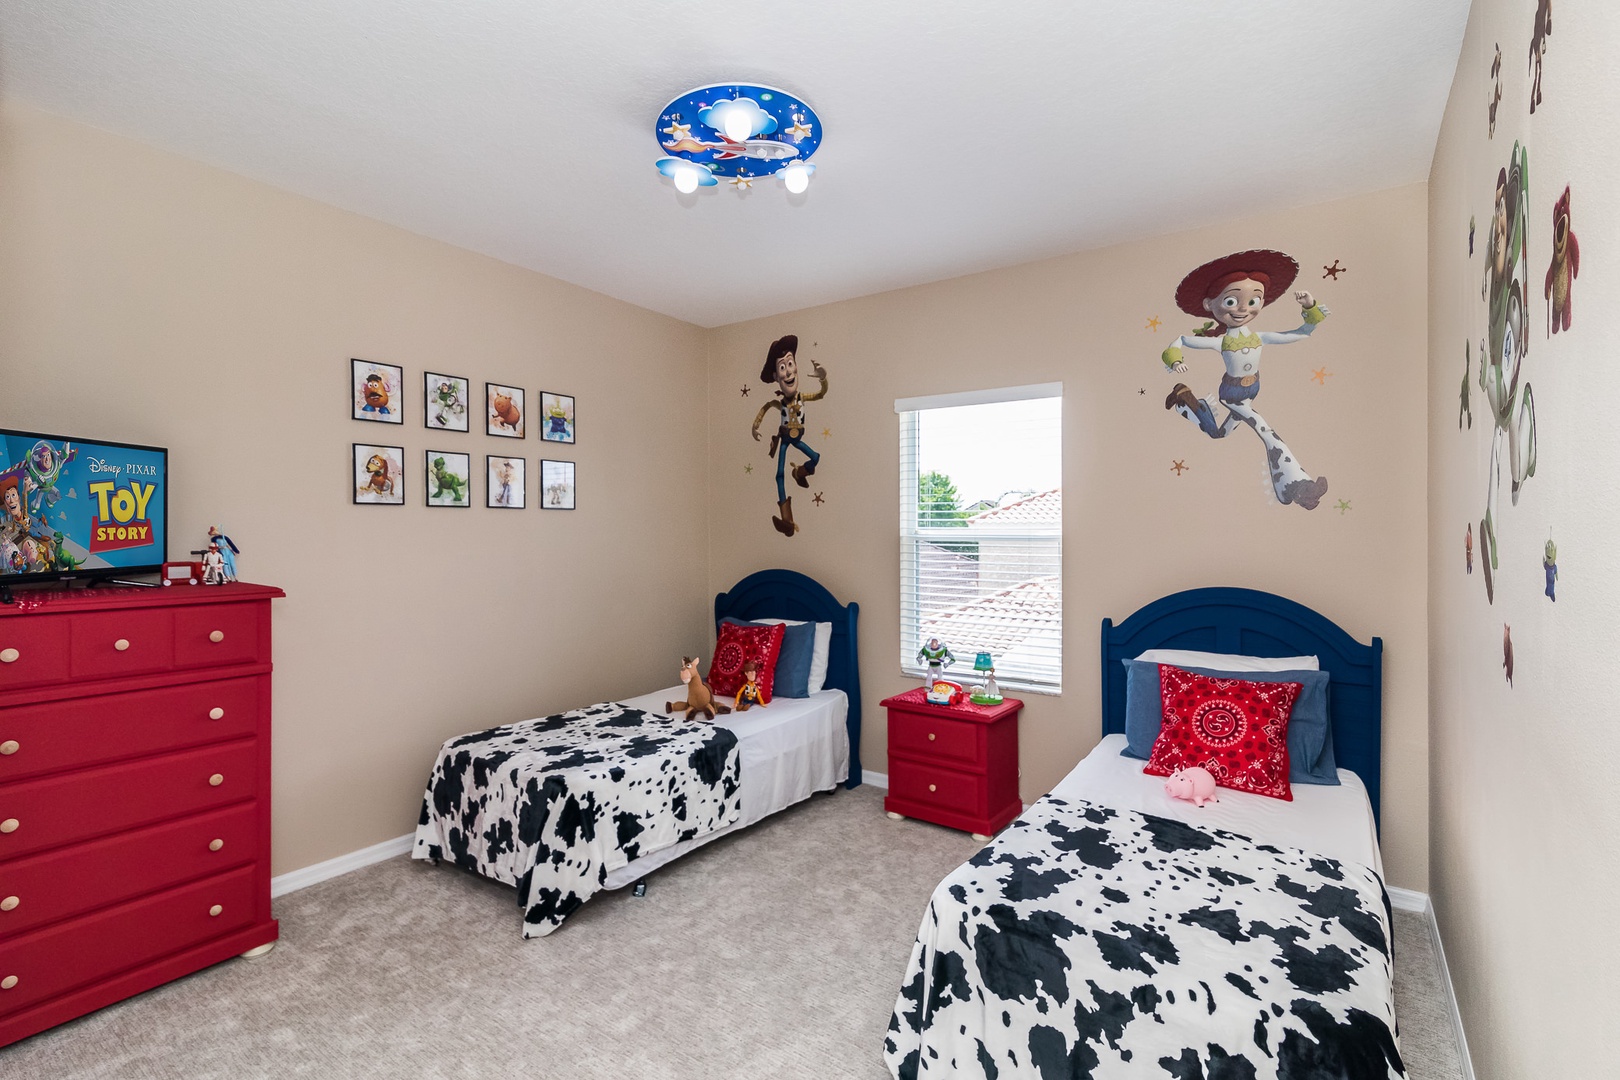 Bedroom 5 Toy Story themed with 2 Twin beds, and TV (2nd floor)